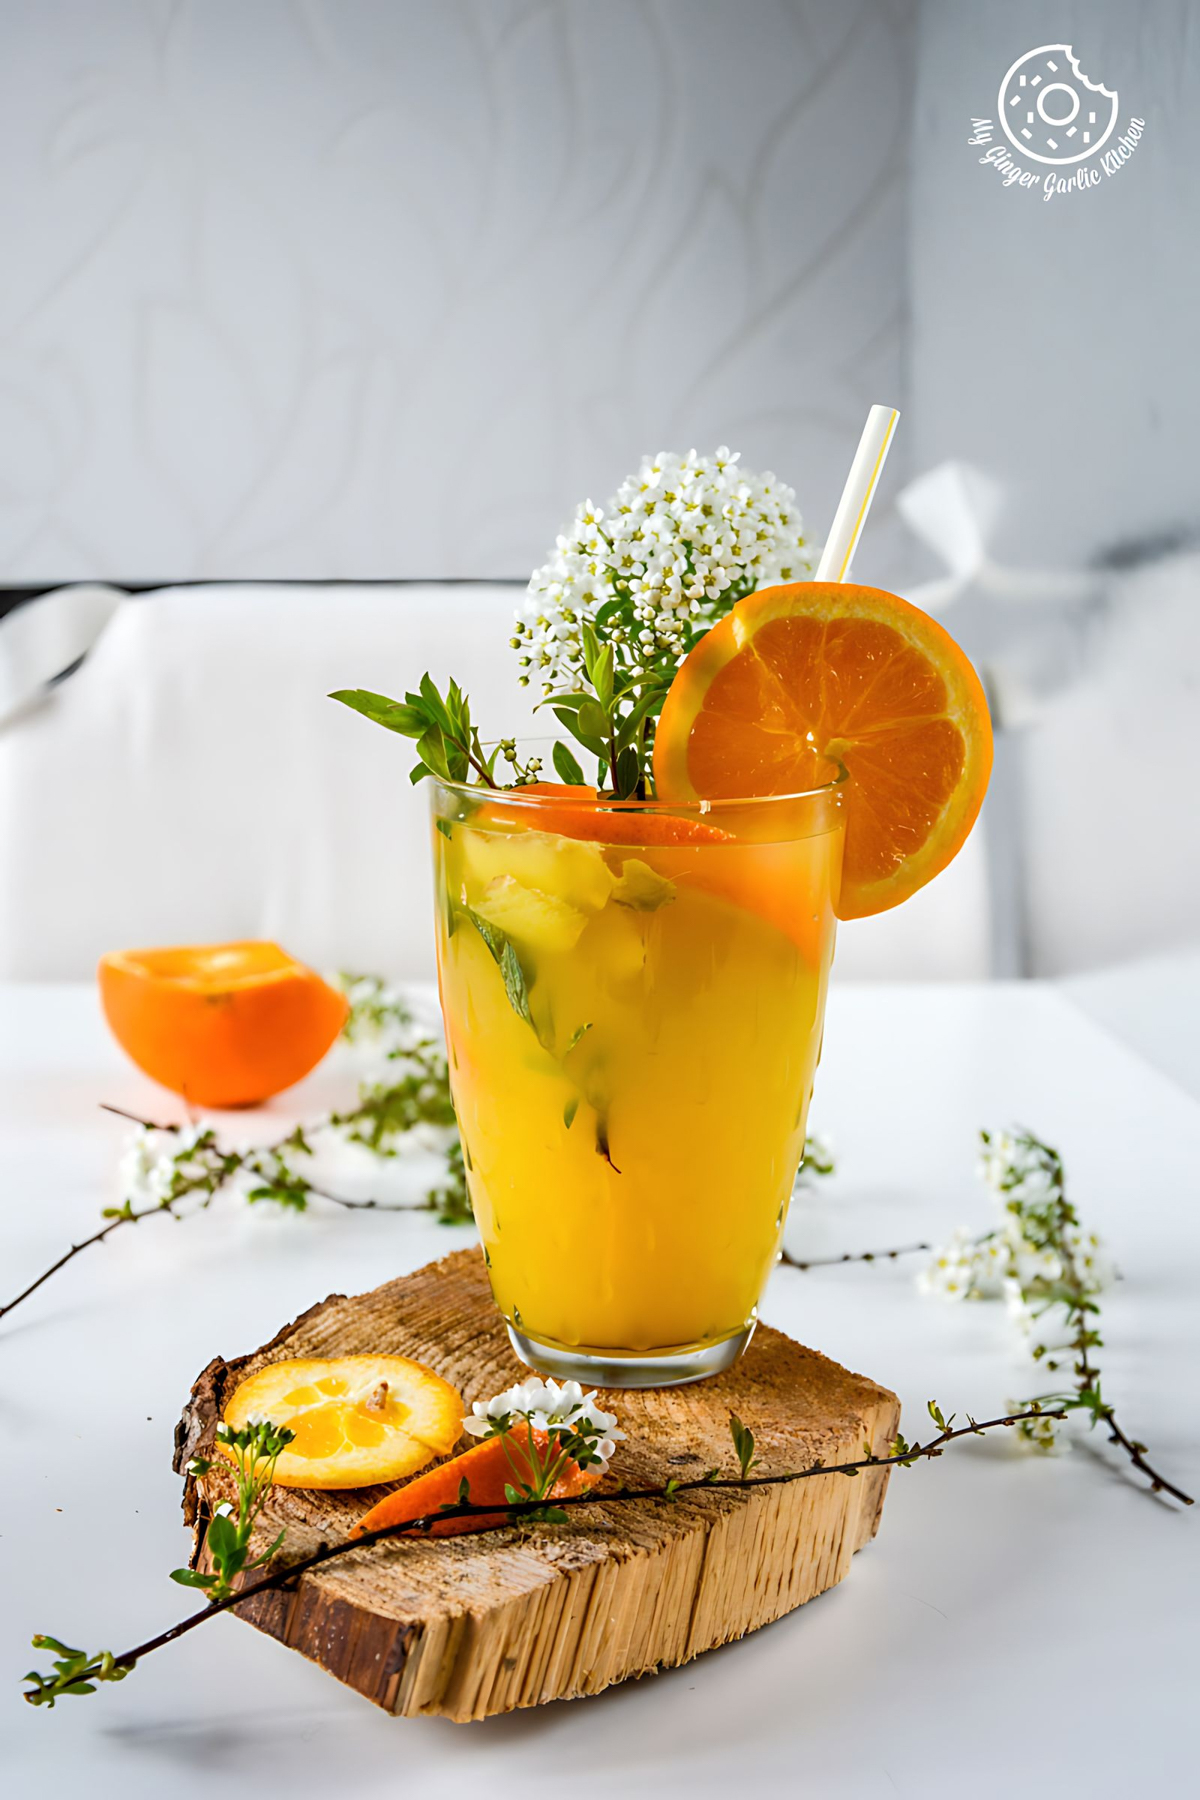 https://www.mygingergarlickitchen.com/wp-content/uploads/2015/05/non-alcoholic-ginger-mimosa-a-perfect-summer-mocktail-image-62.jpg